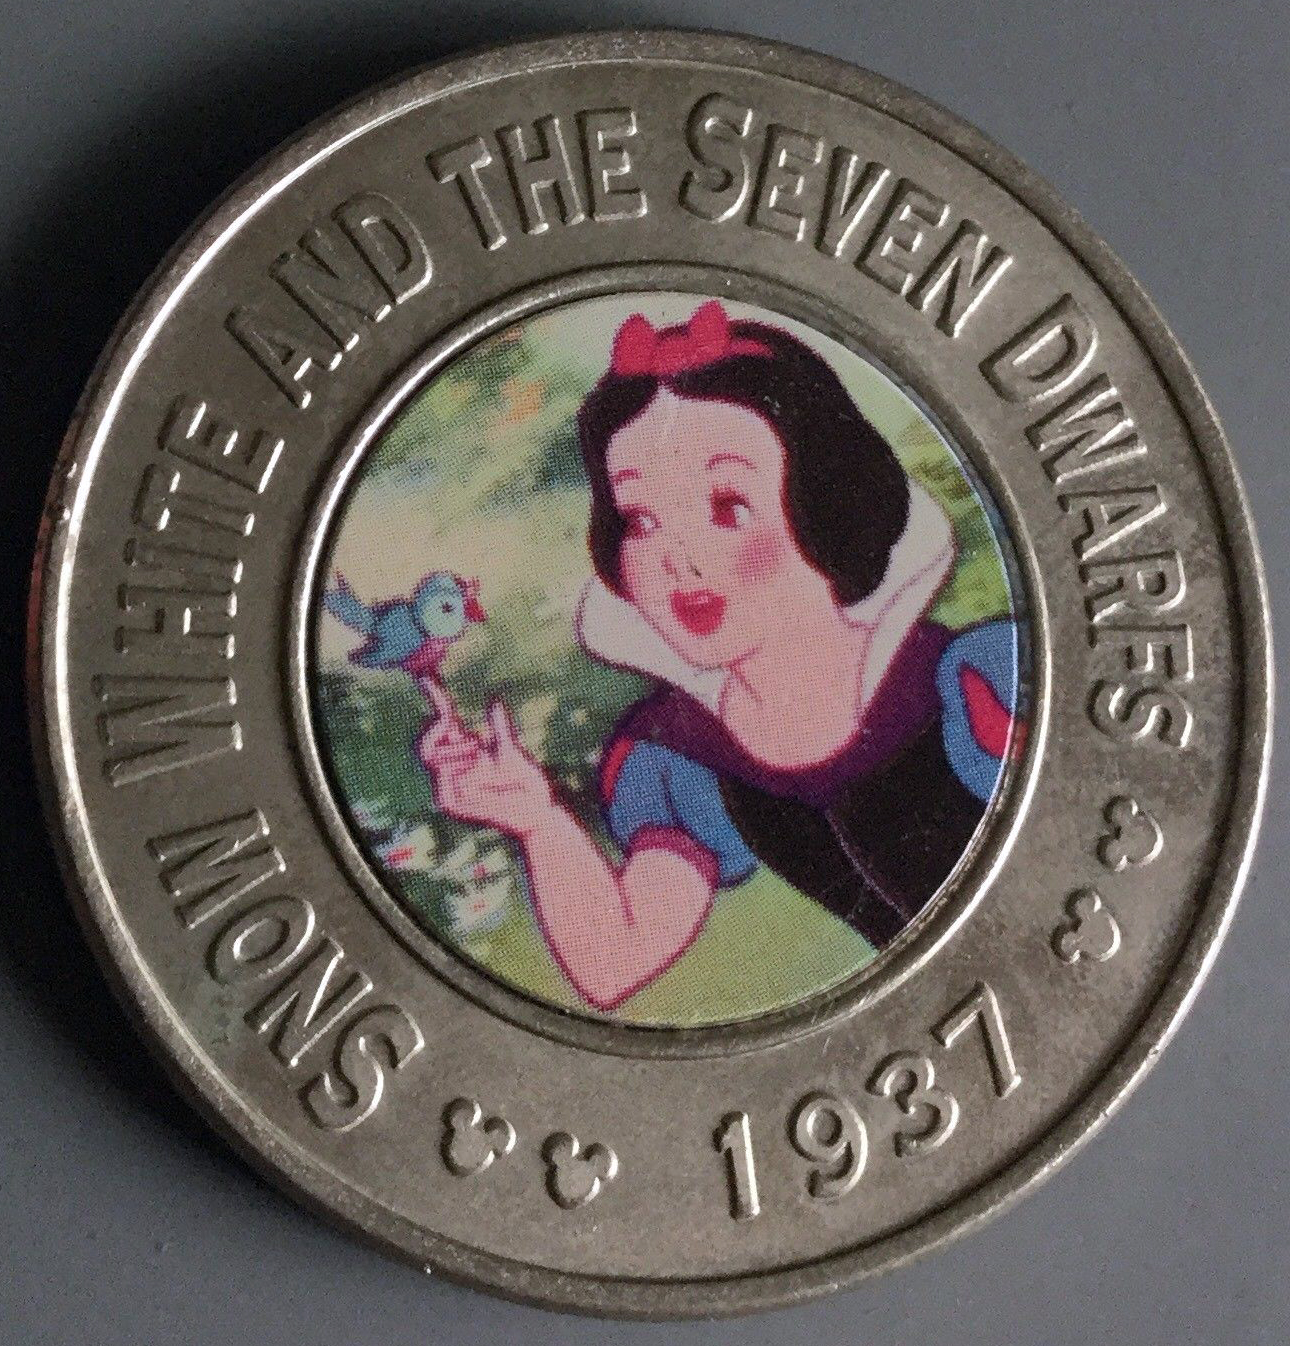 Filmic Light - Snow White Archive: The Disney Decades Coin